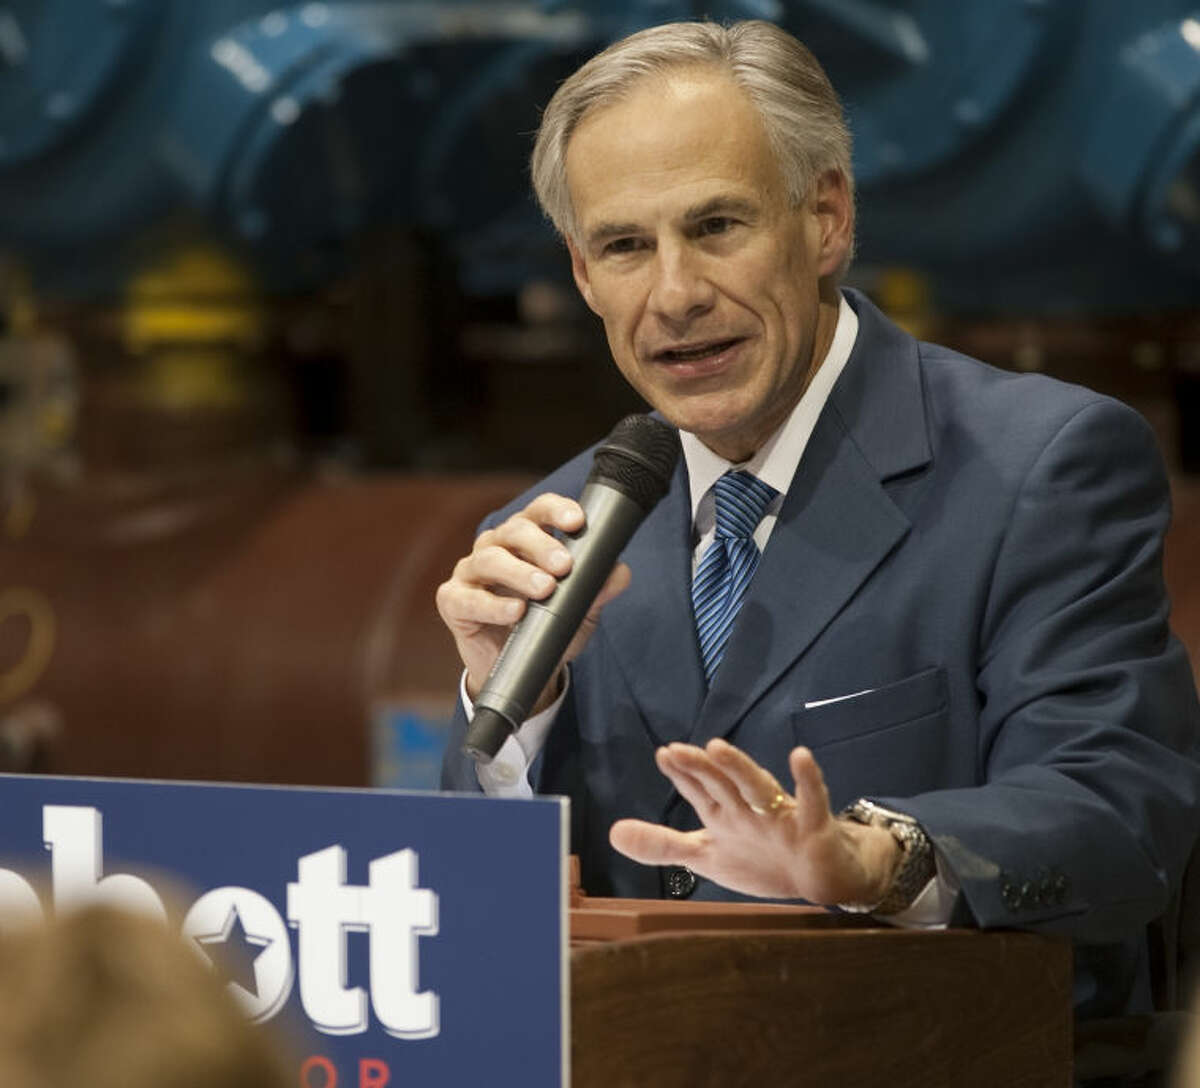 (File Photo) Texas AG Greg Abbott speaks Thursday at Compressor Systems, during a campaign stop for his run for Texas governor. Tim Fischer\Reporter-Telegram